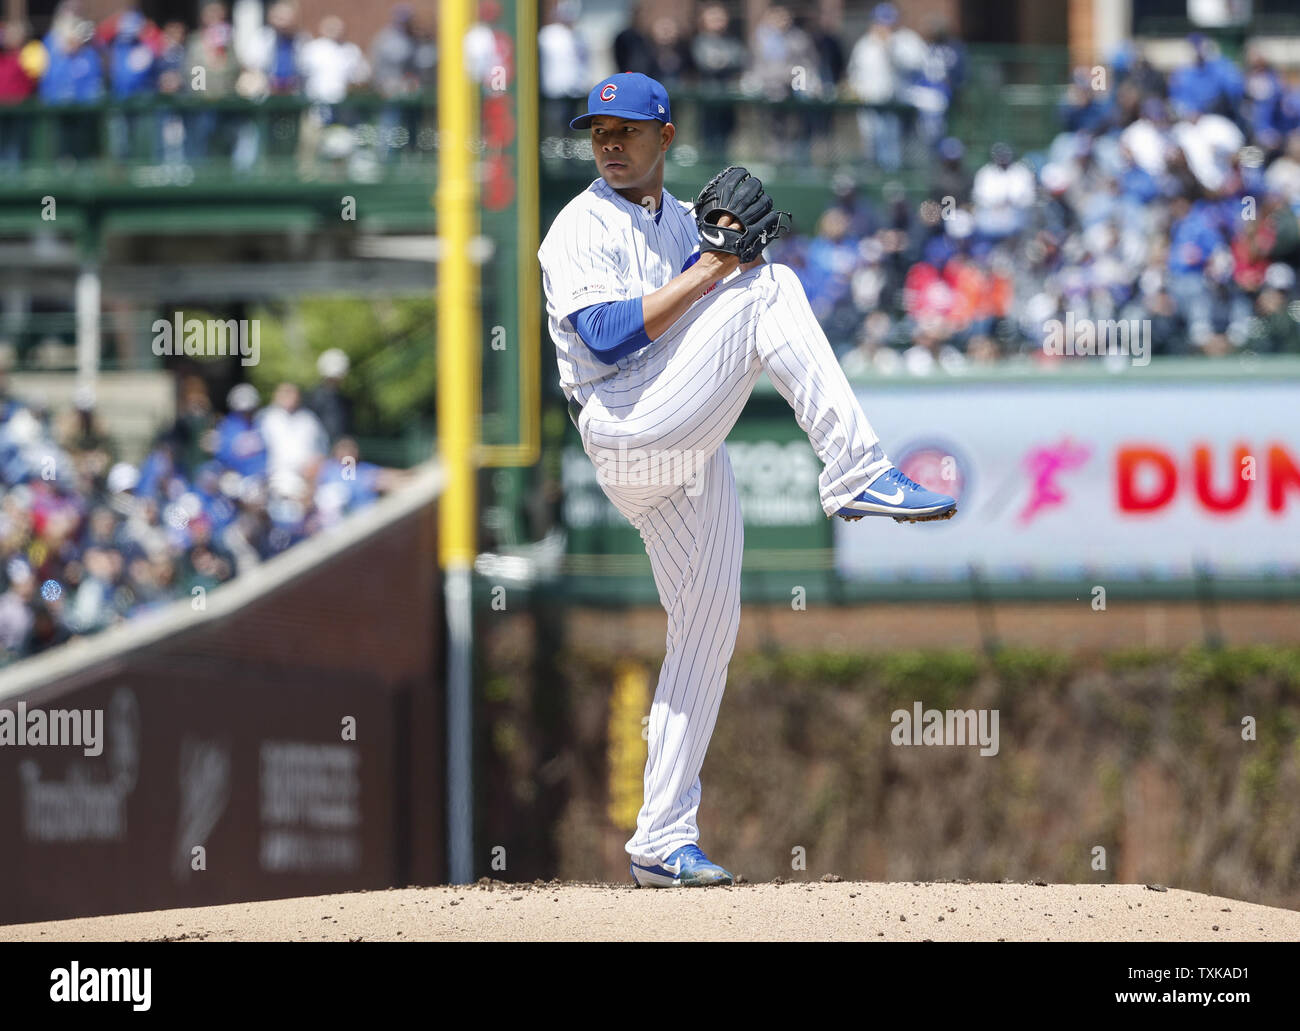 Chicago Cubs starting pitcher Jose Quintana delivers against the Milwaukee Brewers in the first inning at Wrigley Field on May 10, 2019 in Chicago. Photo by Kamil Krzaczynski/UPI Stock Photo